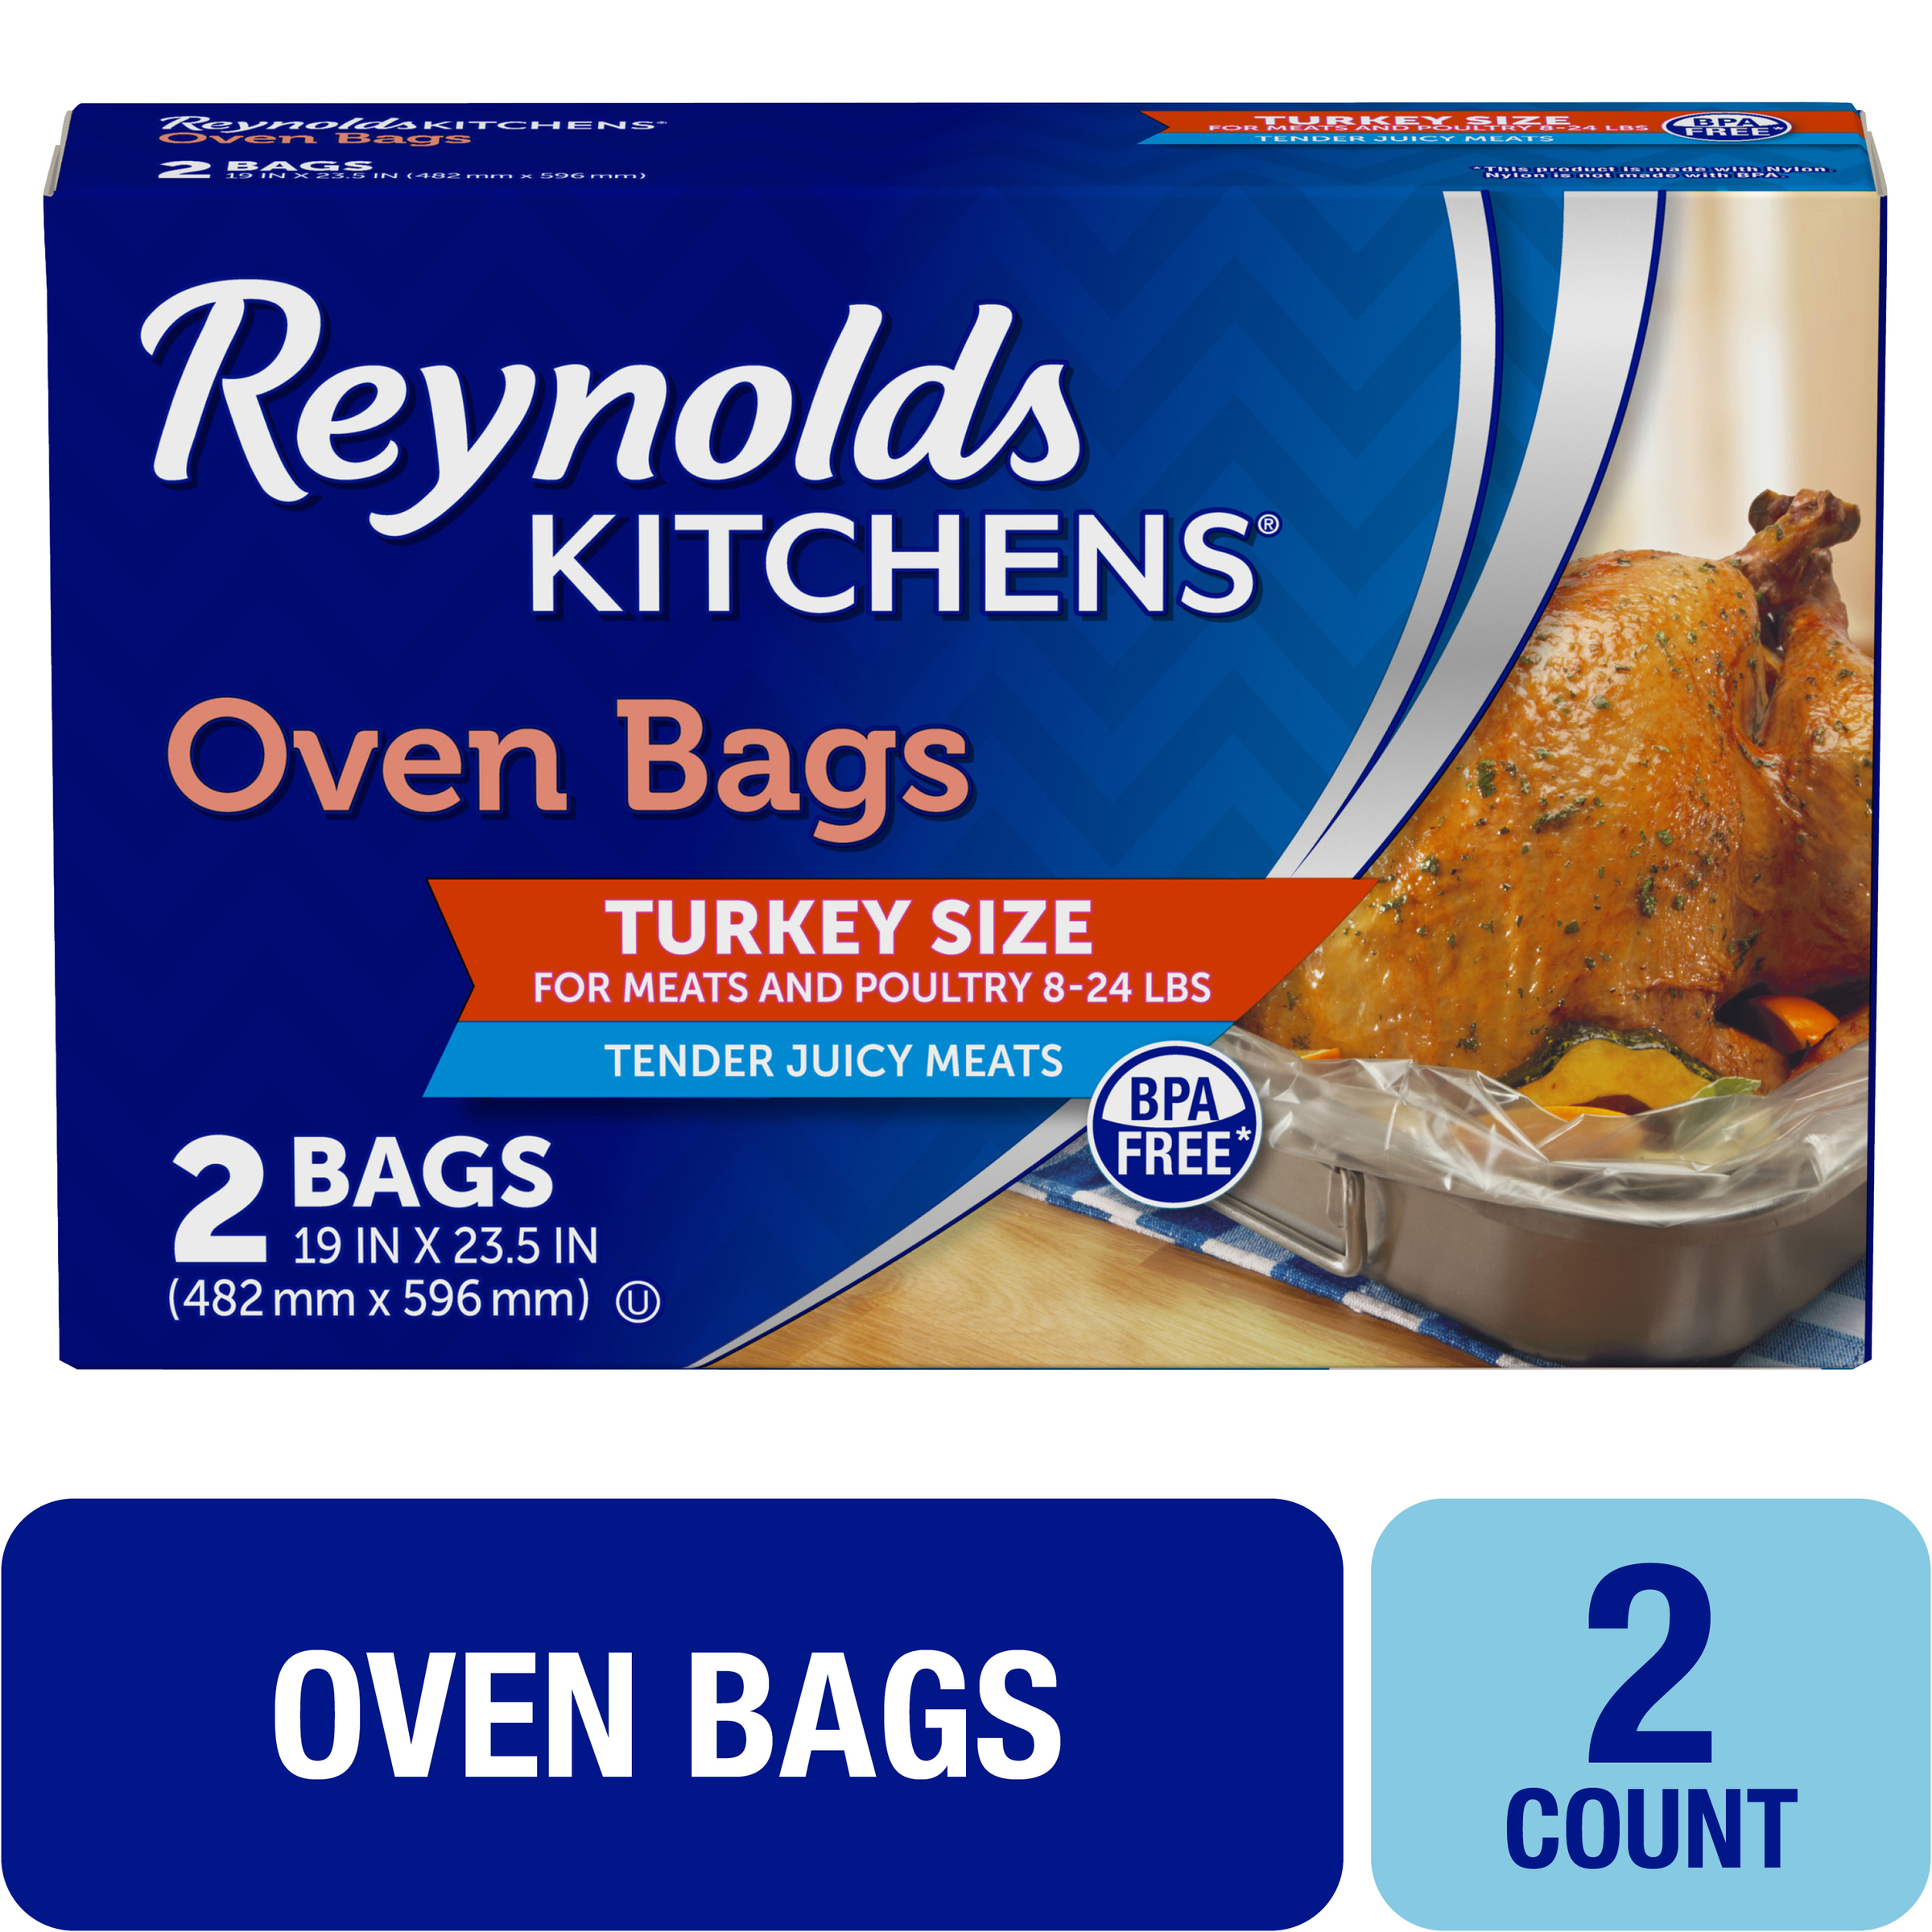 Reynolds Kitchens Turkey Oven Bags, 19 x 23.5 inches, 2 Count - image 1 of 6